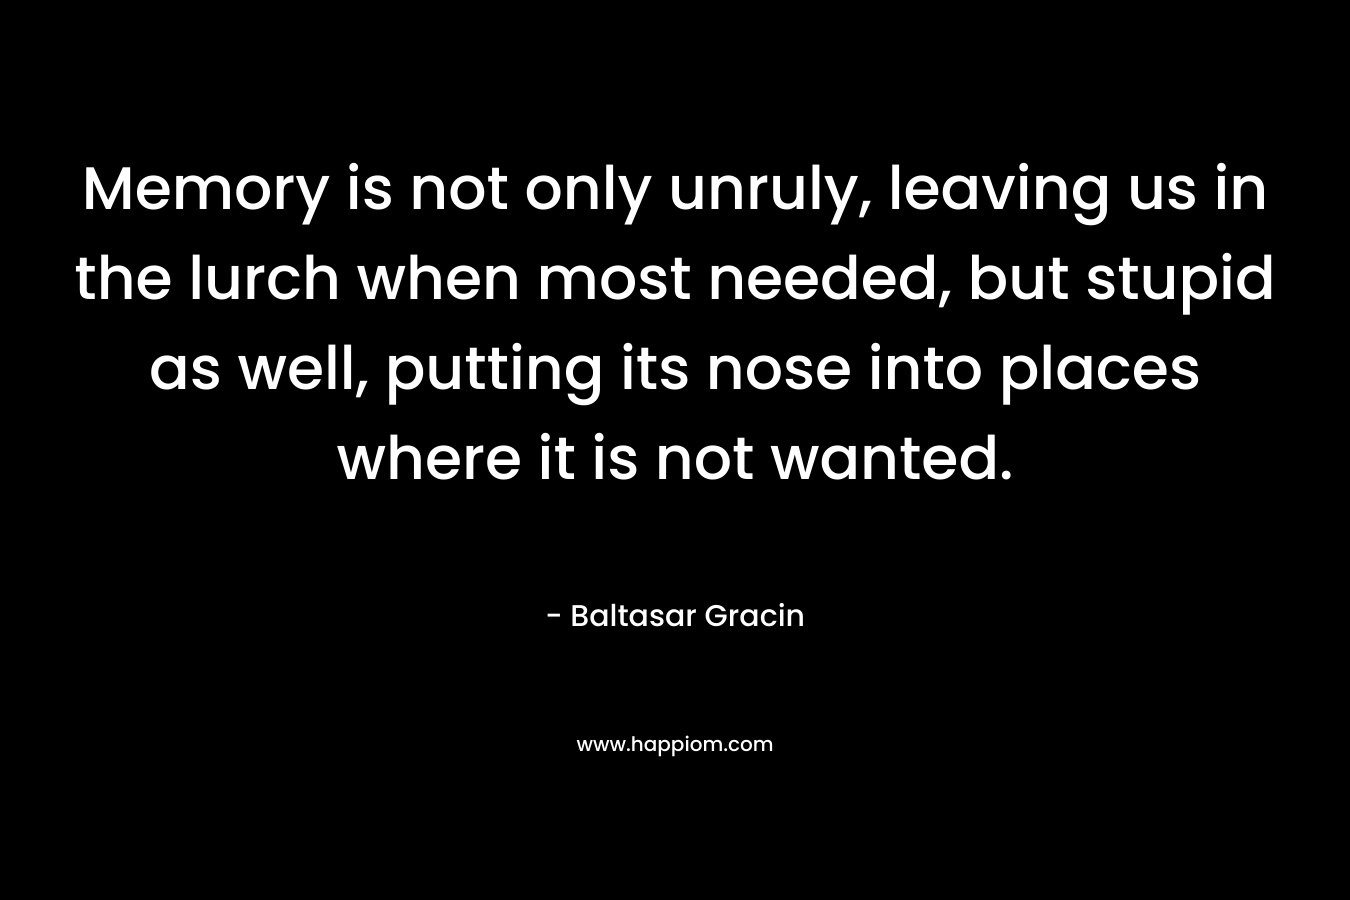 Memory is not only unruly, leaving us in the lurch when most needed, but stupid as well, putting its nose into places where it is not wanted. – Baltasar Gracin